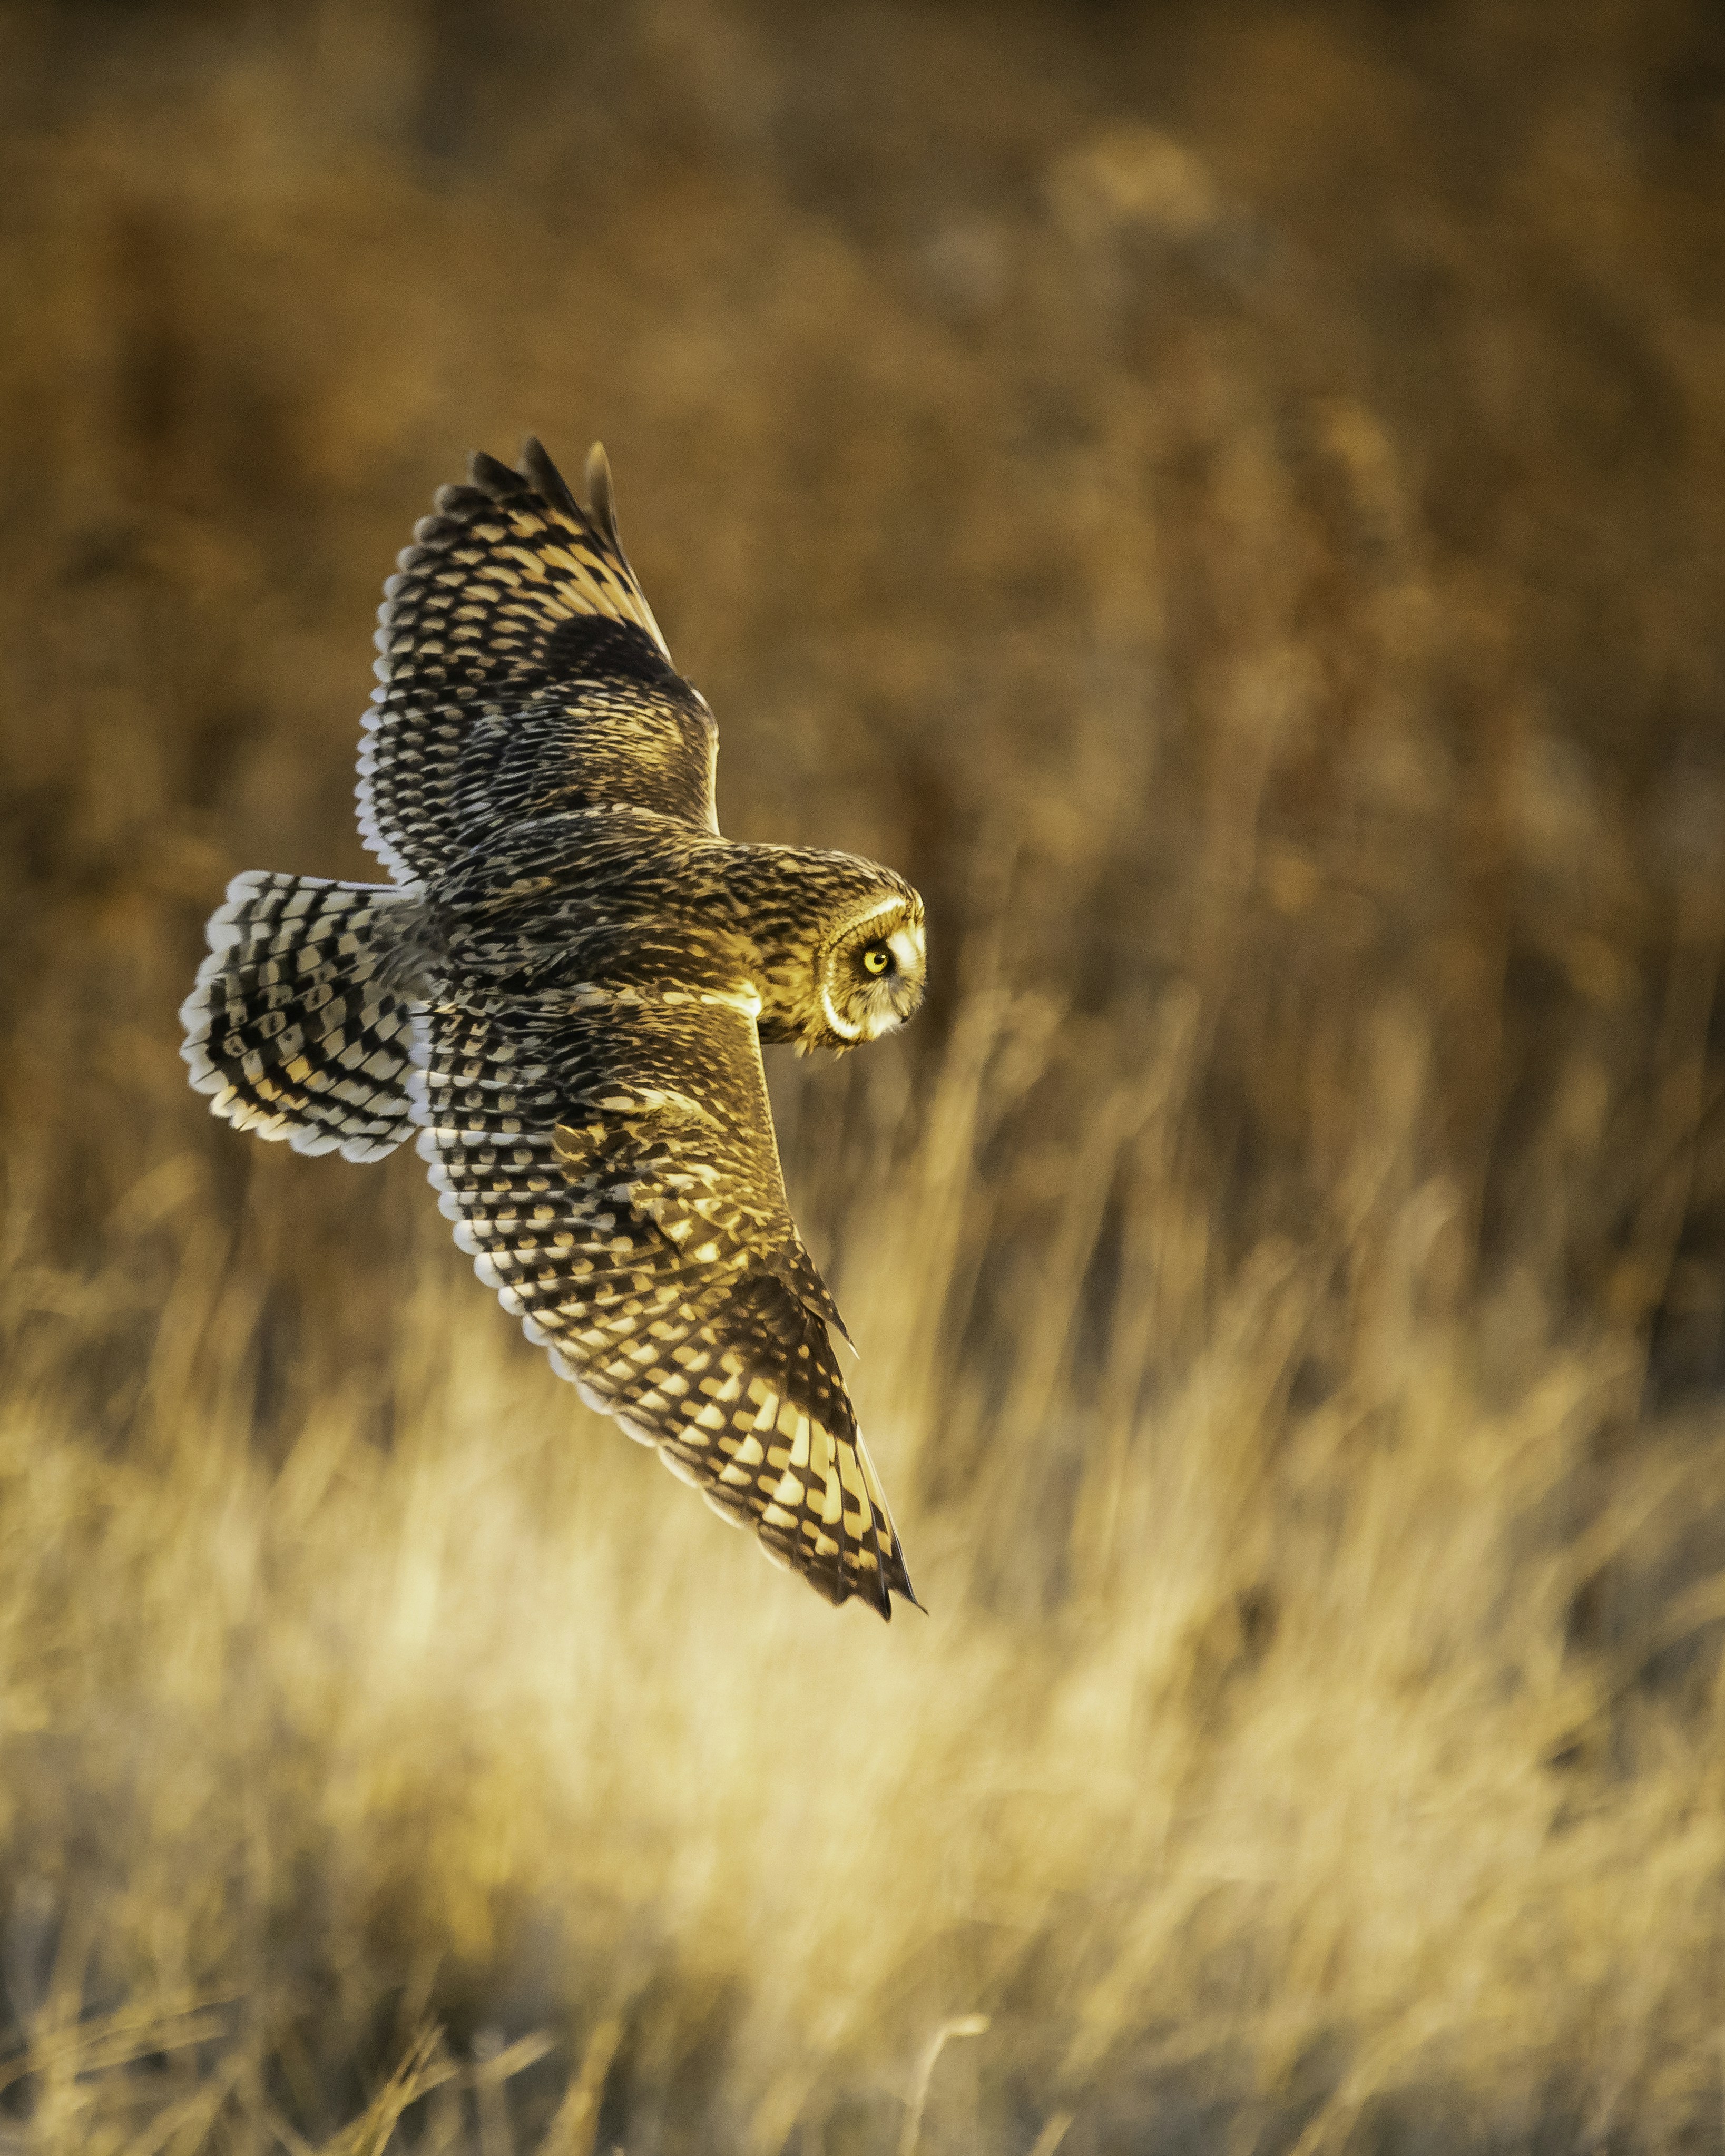 Short eared owl wings.

<p>» style=»max-width:400px;float:left;padding:10px 10px 10px 0px;border:0px;»></p>
<p><h2>Contact Uѕ</h2>
</p>
<p>Oսr agents are herе to hеlp ｙou.</p>
<p>This <a href=